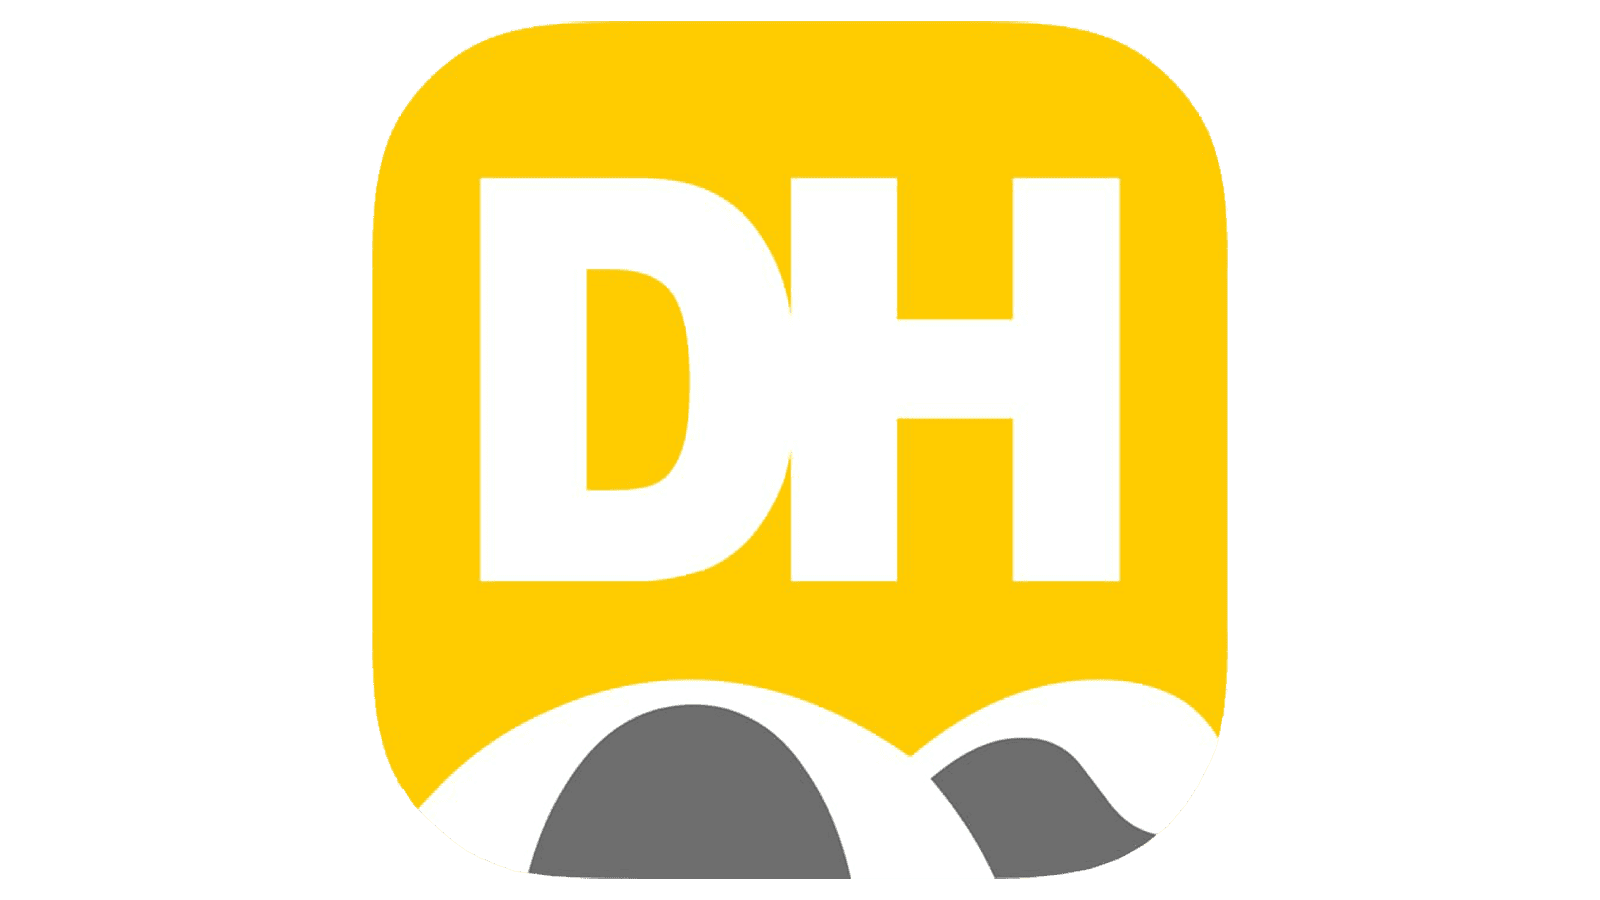 DHgate Logo and symbol, meaning, history, sign.